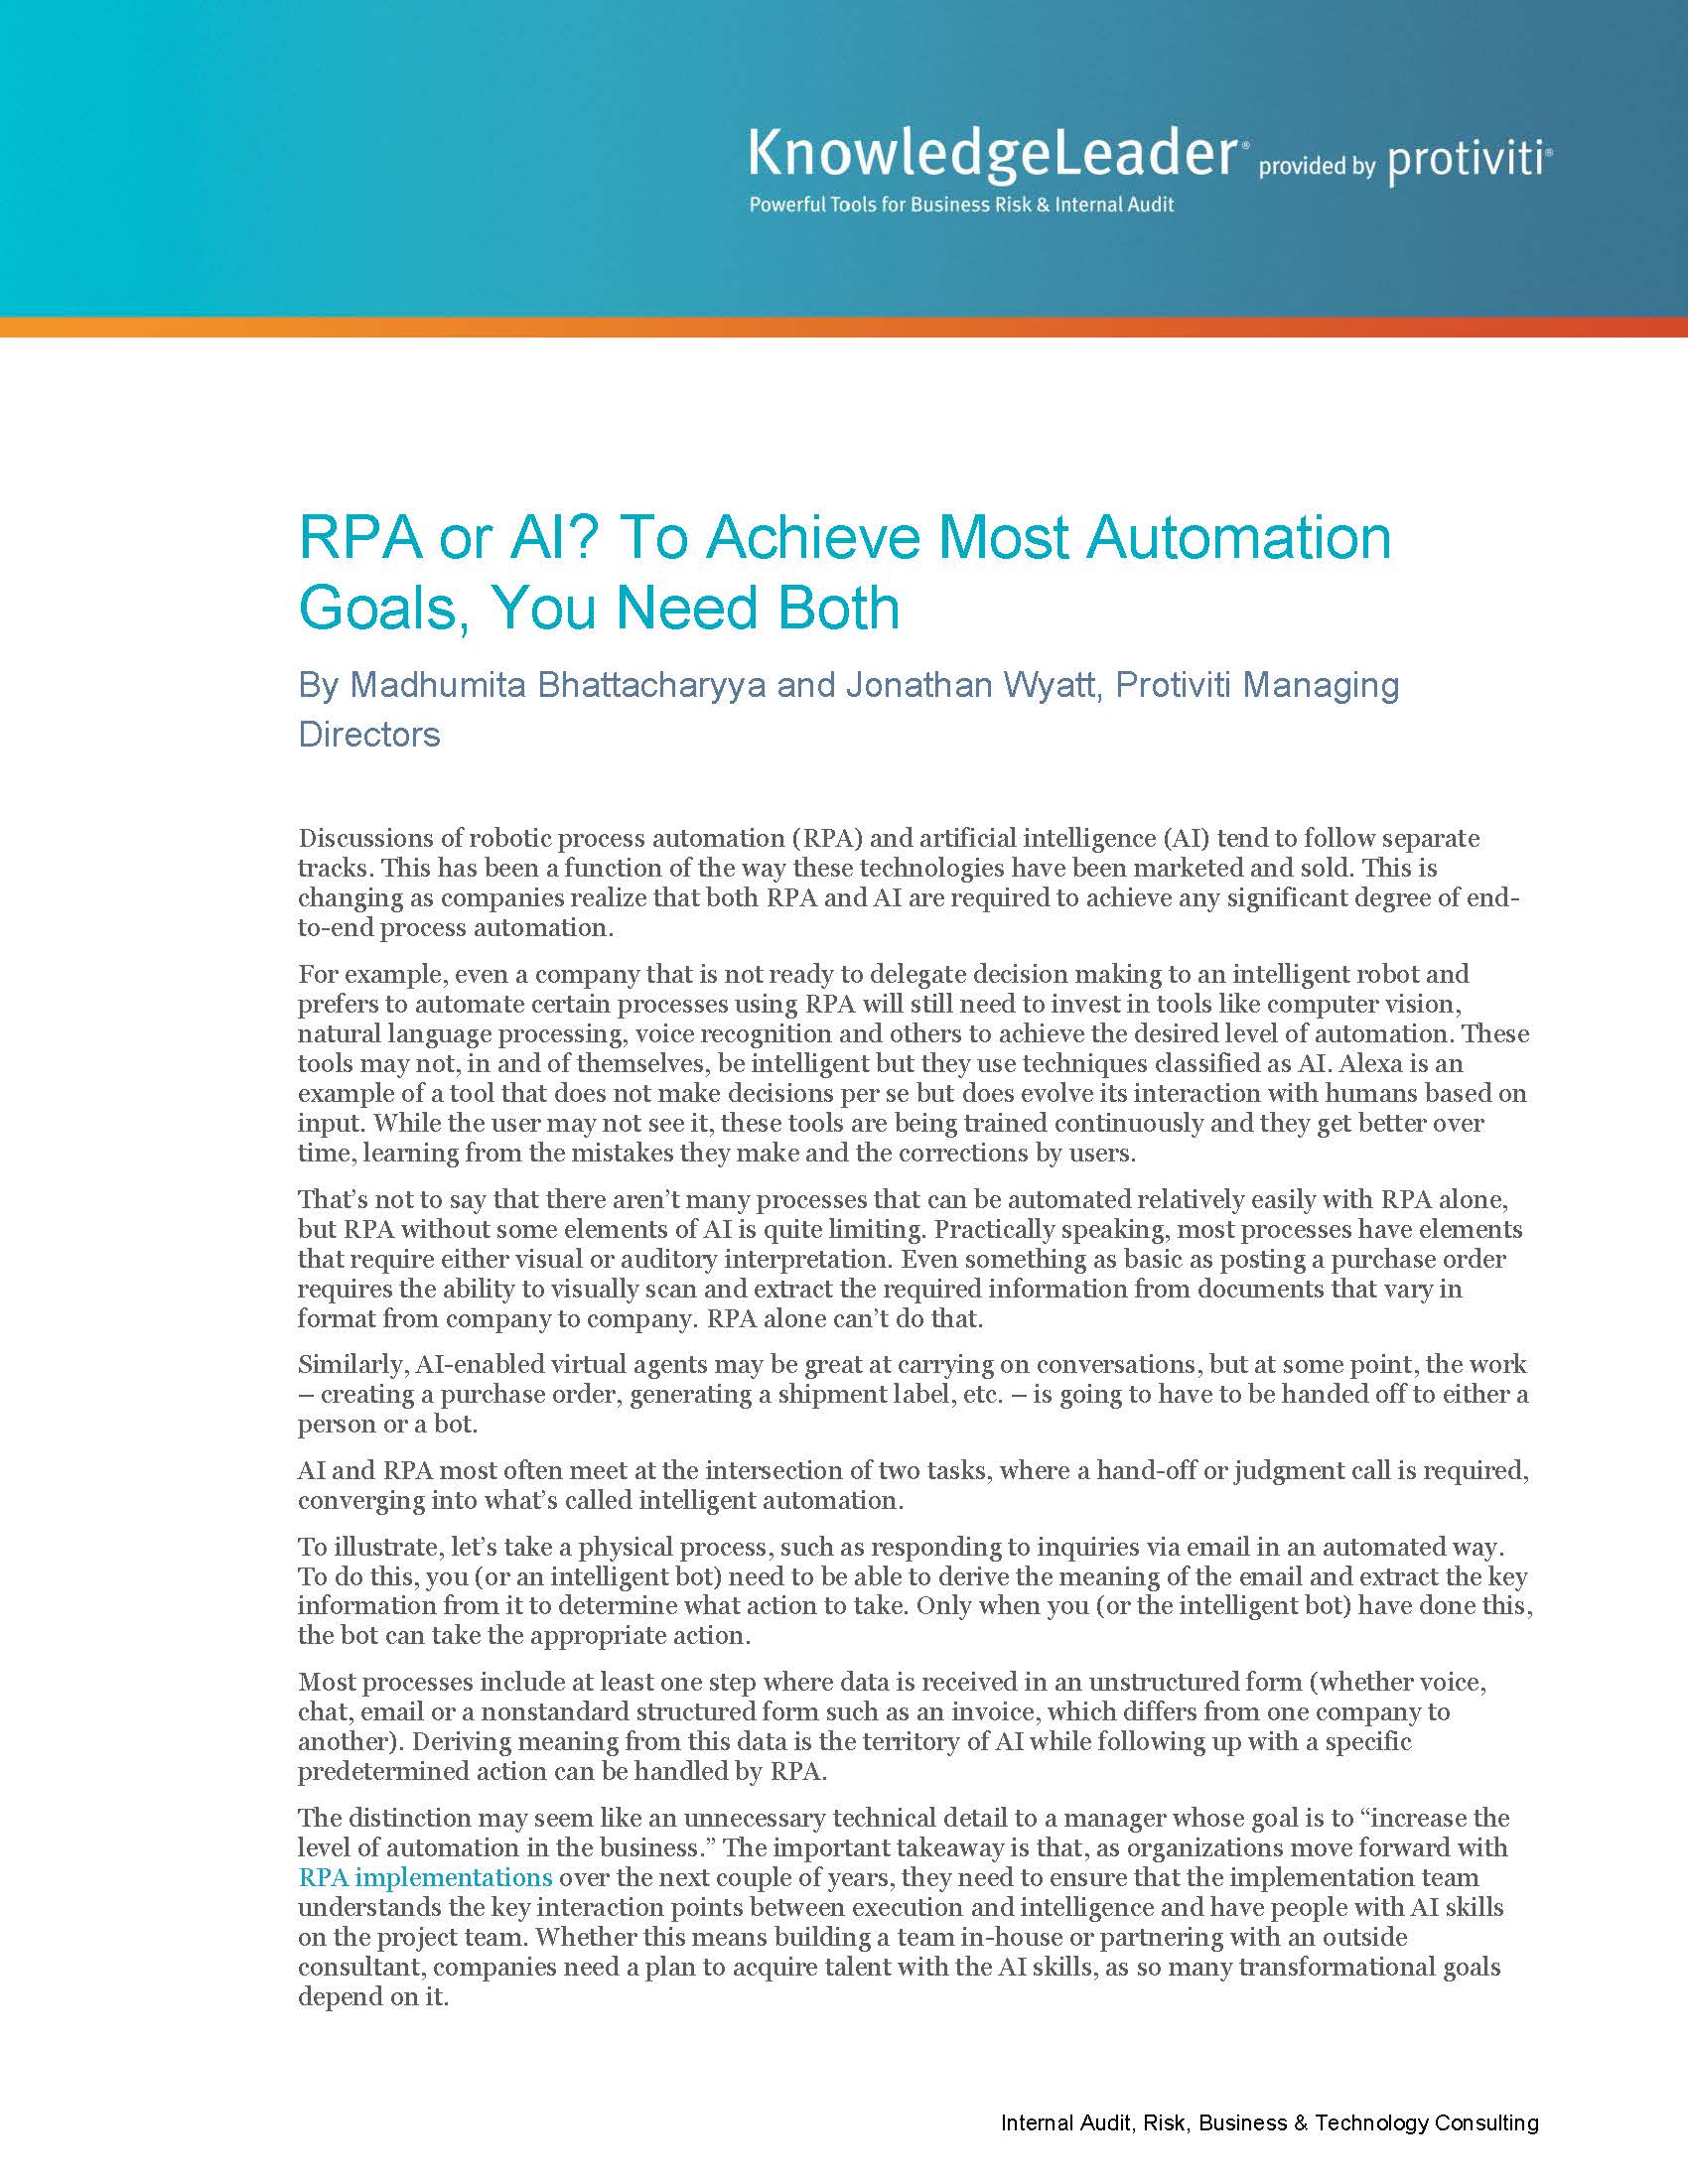 Screenshot of the first page of RPA or AI To Achieve Most Automation Goals, You Need Both